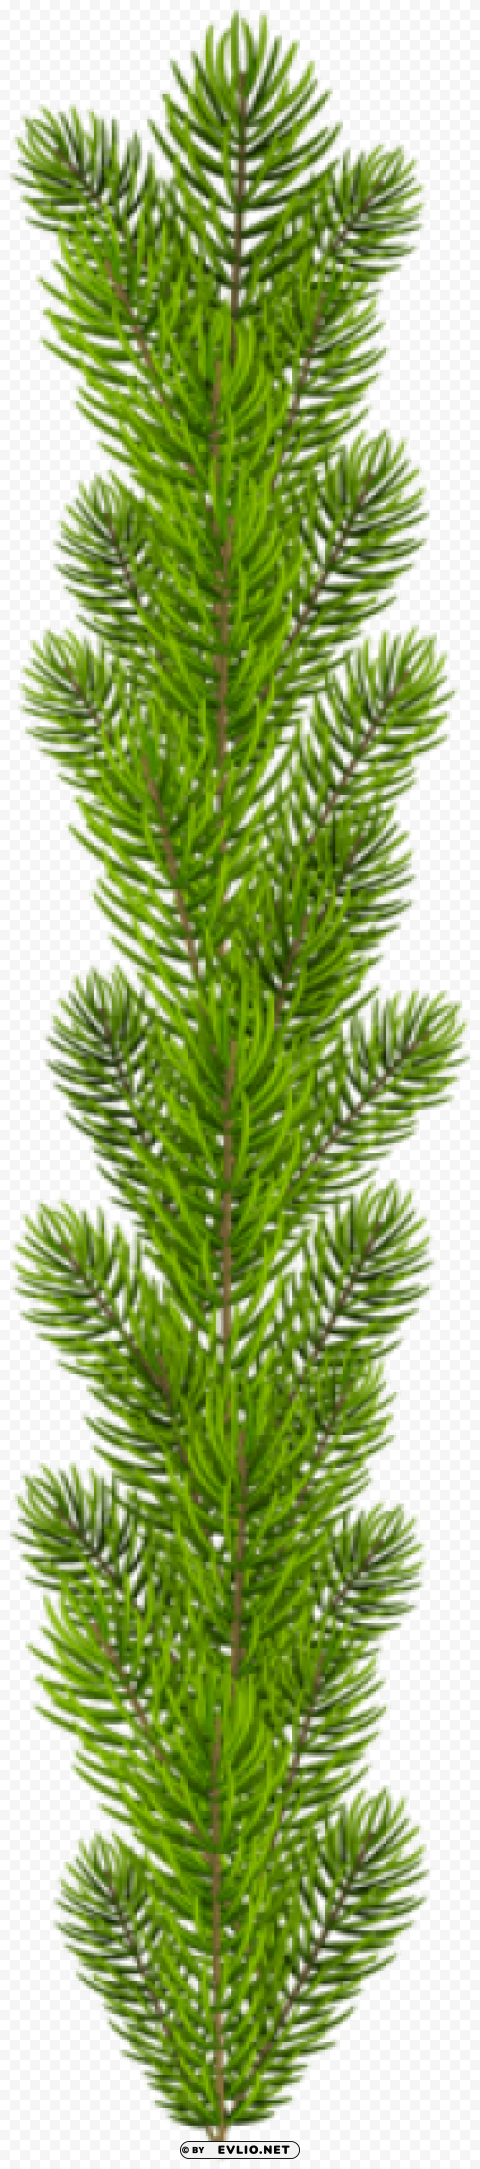 pine tree branch Isolated Character in Transparent Background PNG